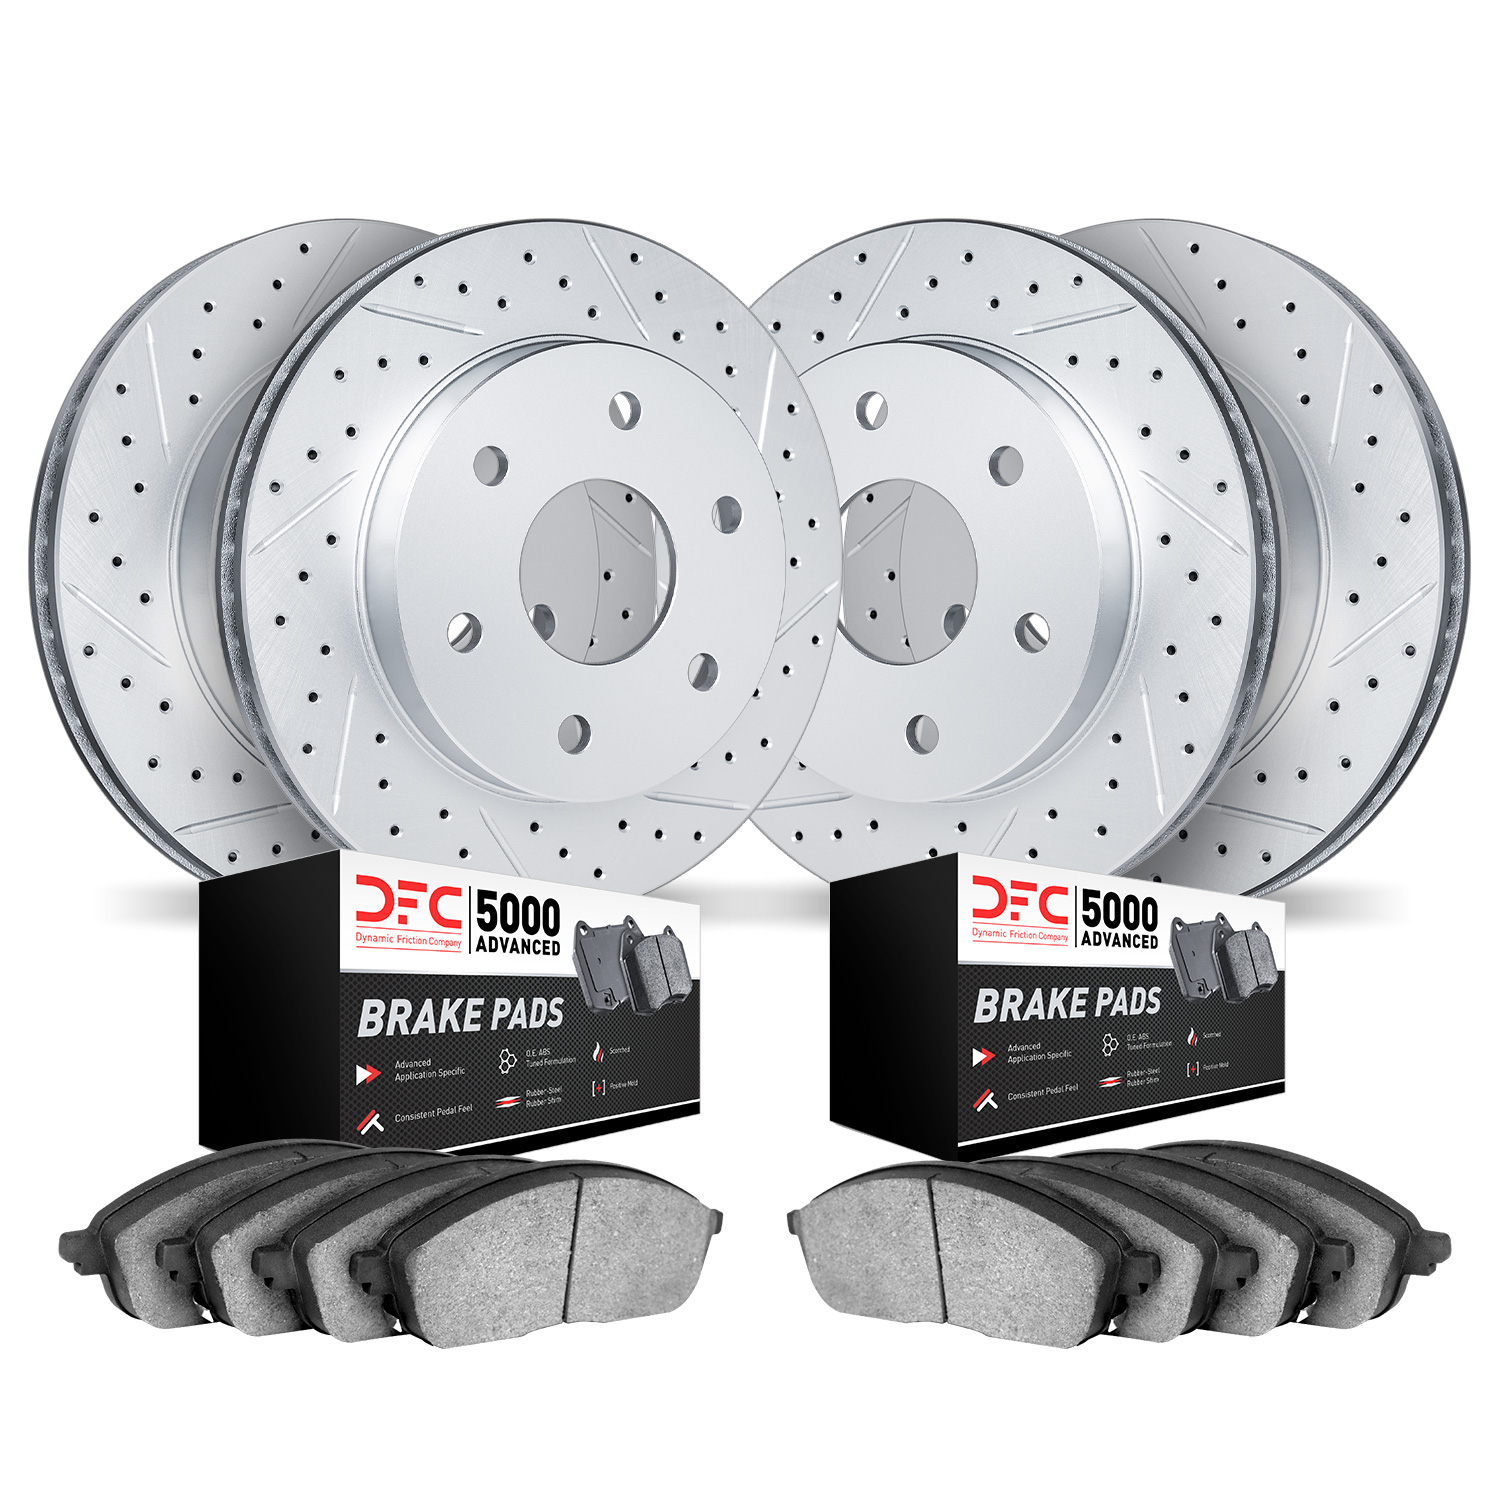 2504-47272 Geoperformance Drilled/Slotted Rotors w/5000 Advanced Brake Pads Kit, 2006-2009 GM, Position: Front and Rear